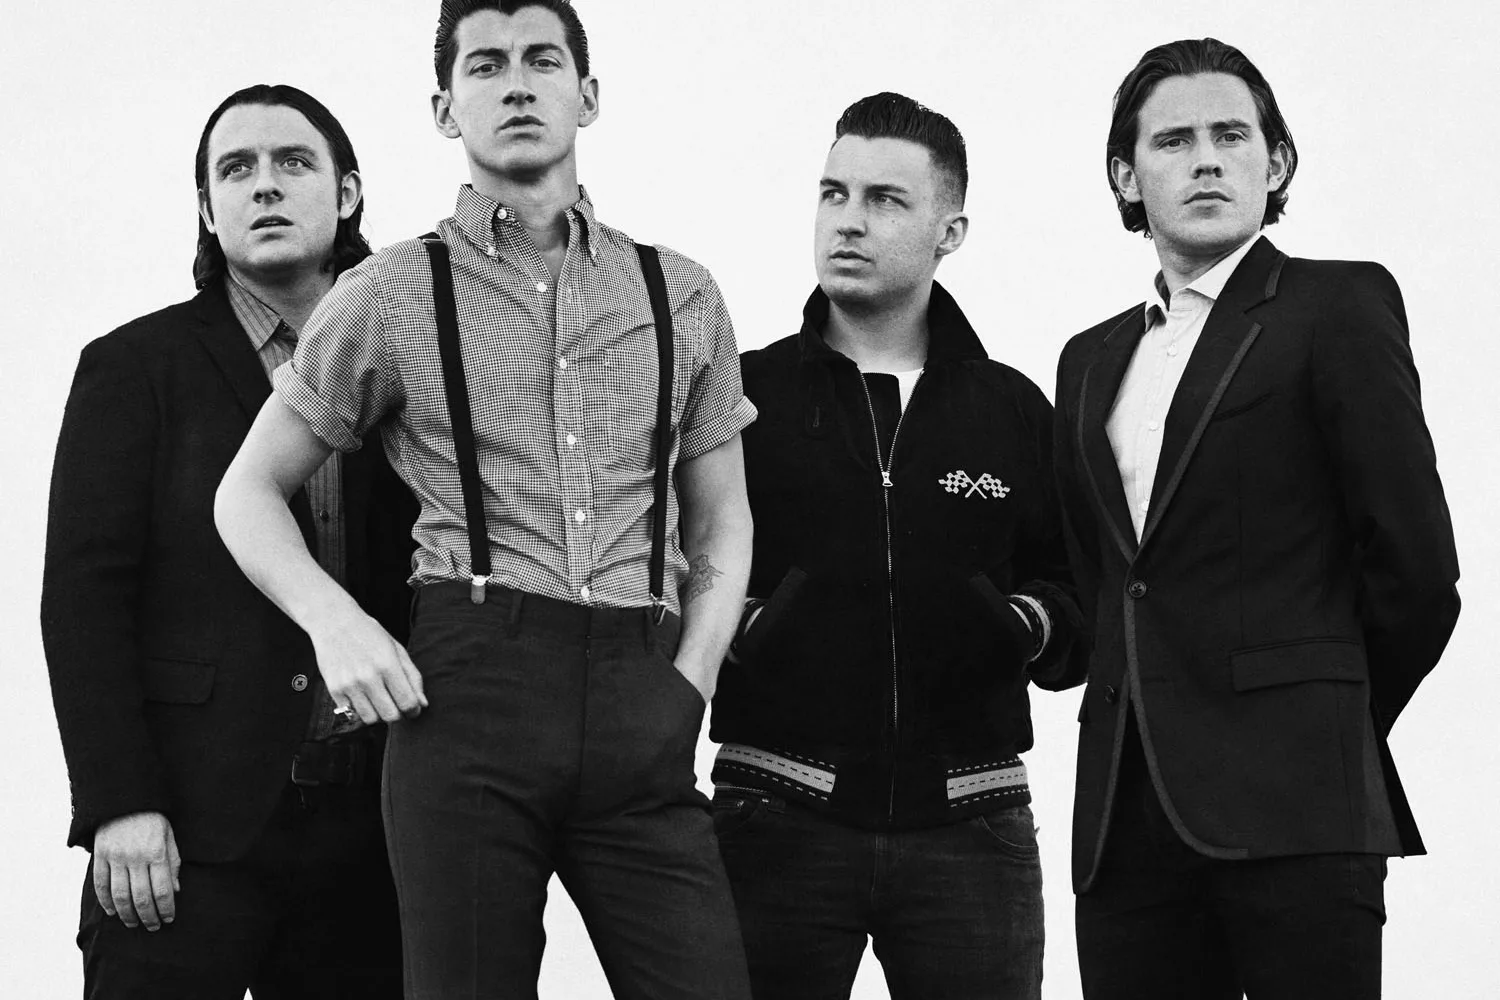 Arctic Monkeys are set to release a new album in 2018